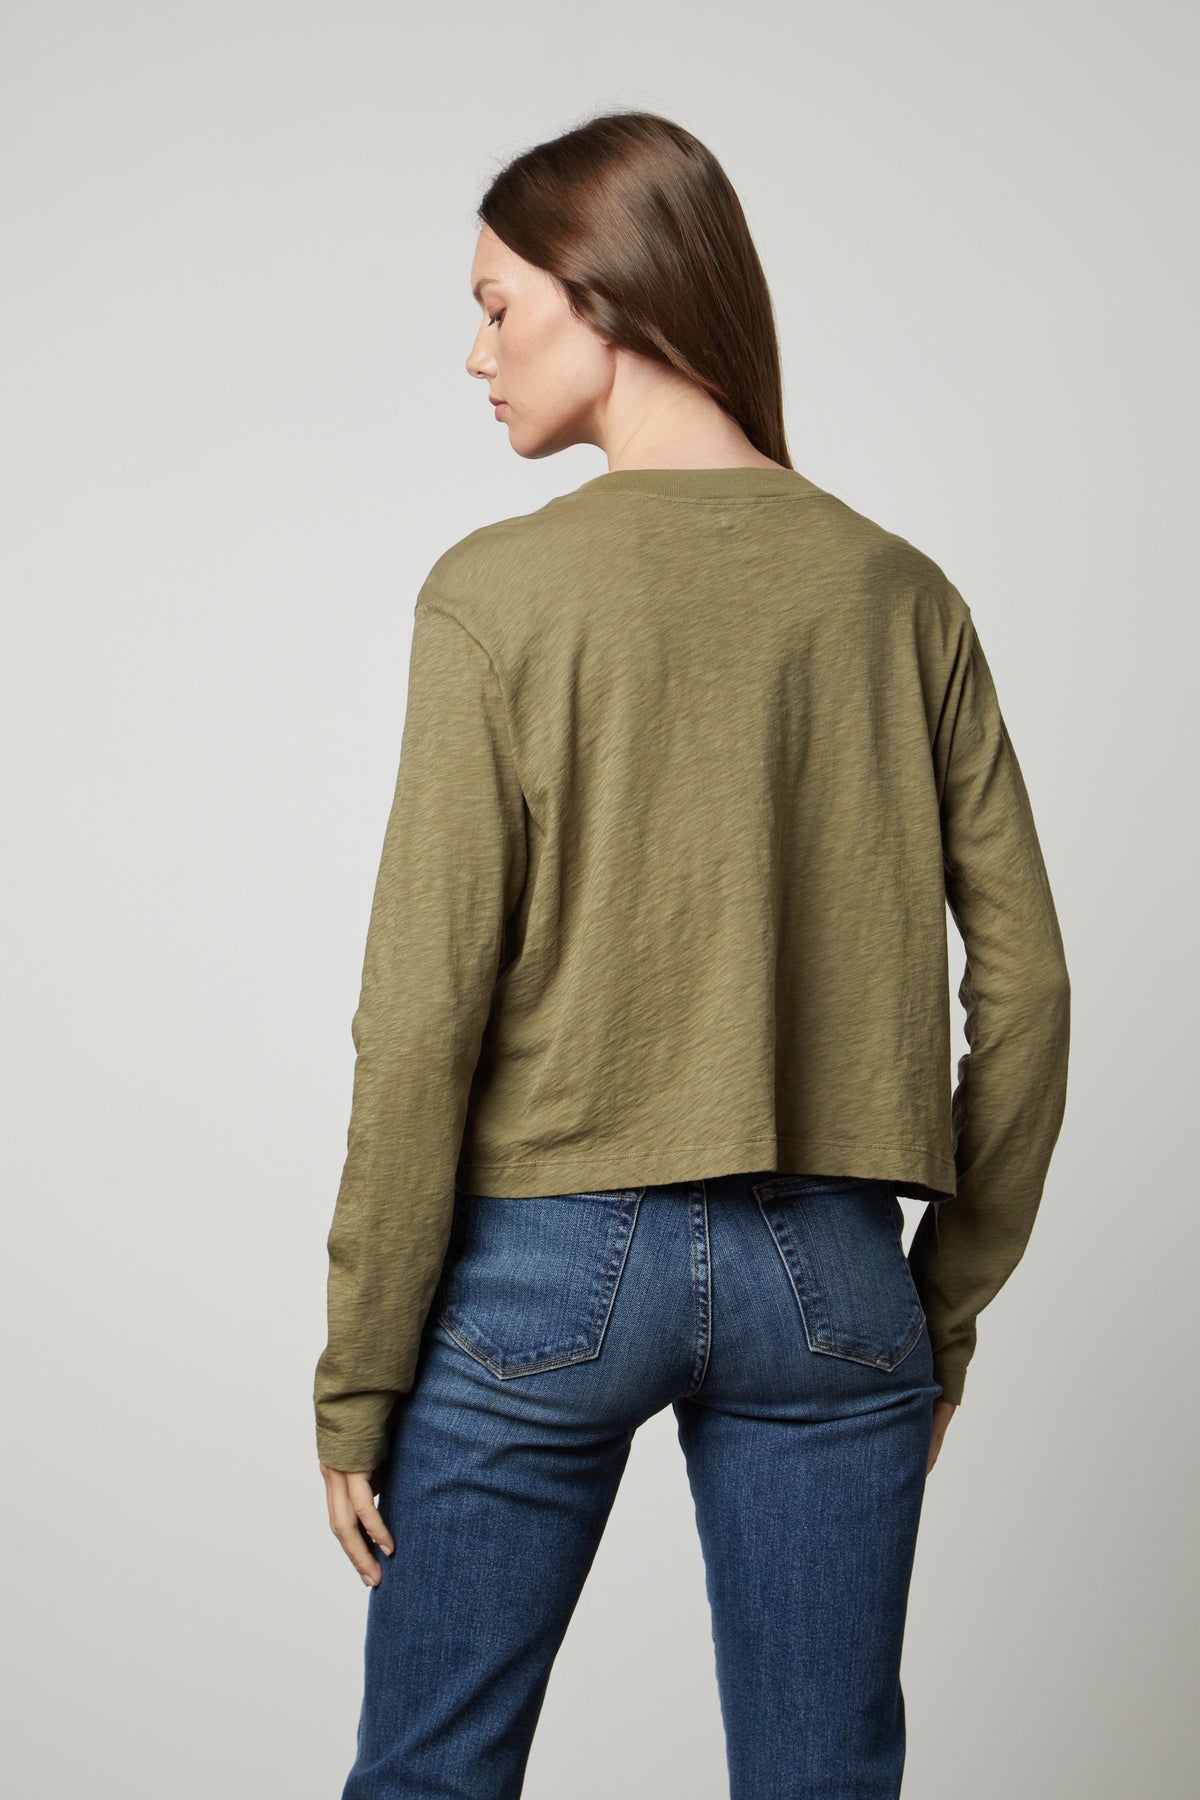 The view of a woman wearing the Velvet by Graham & Spencer HEATHER CREW NECK CROPPED TEE in olive green jeans and a long-sleeved shirt.-35655736131777